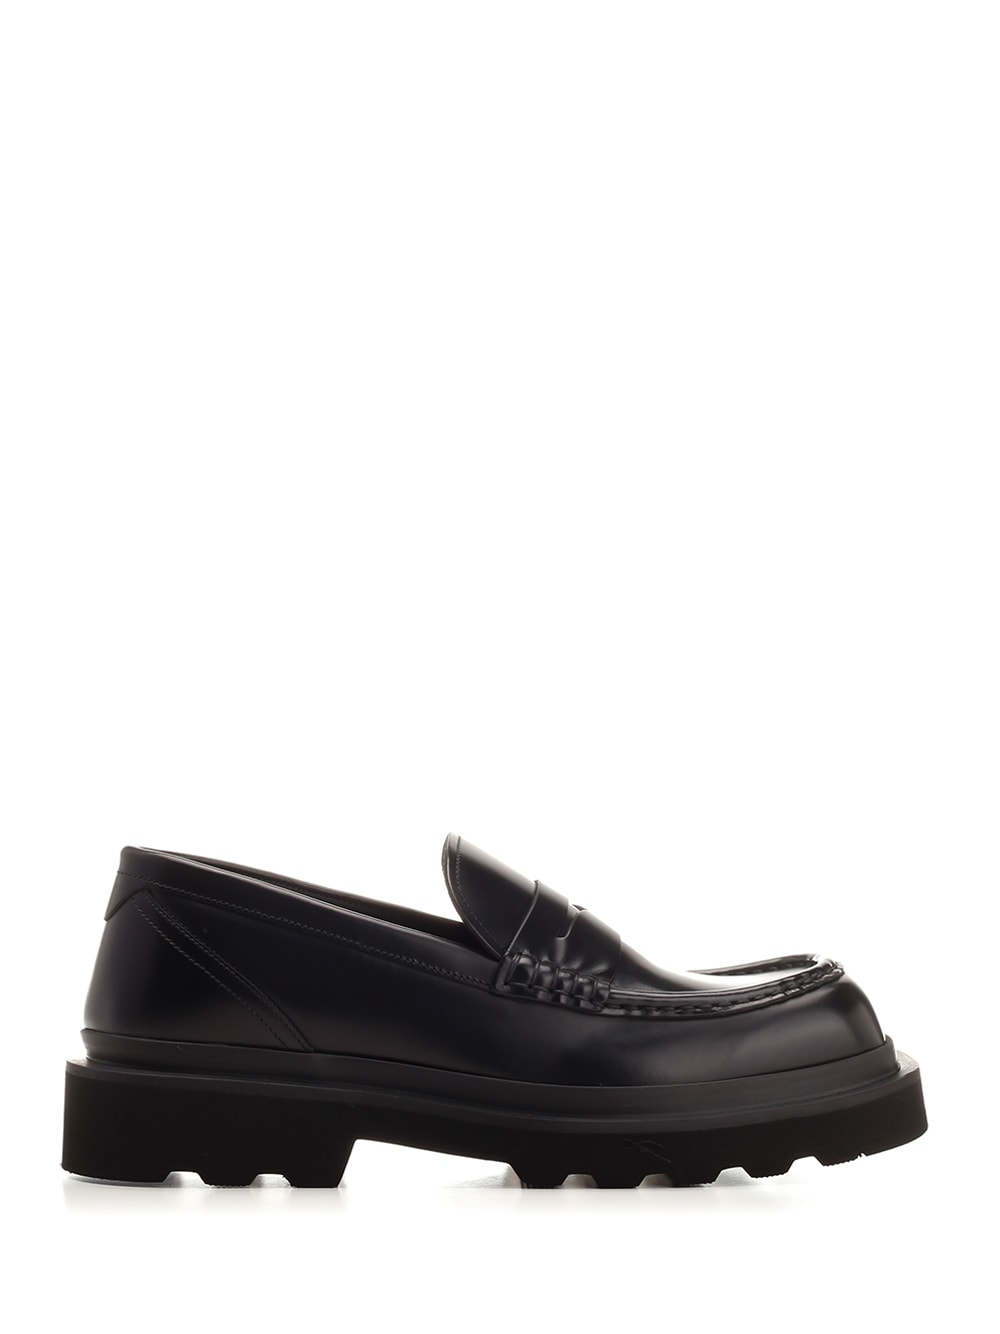 DOLCE & GABBANA BLACK LEATHER LOAFERS